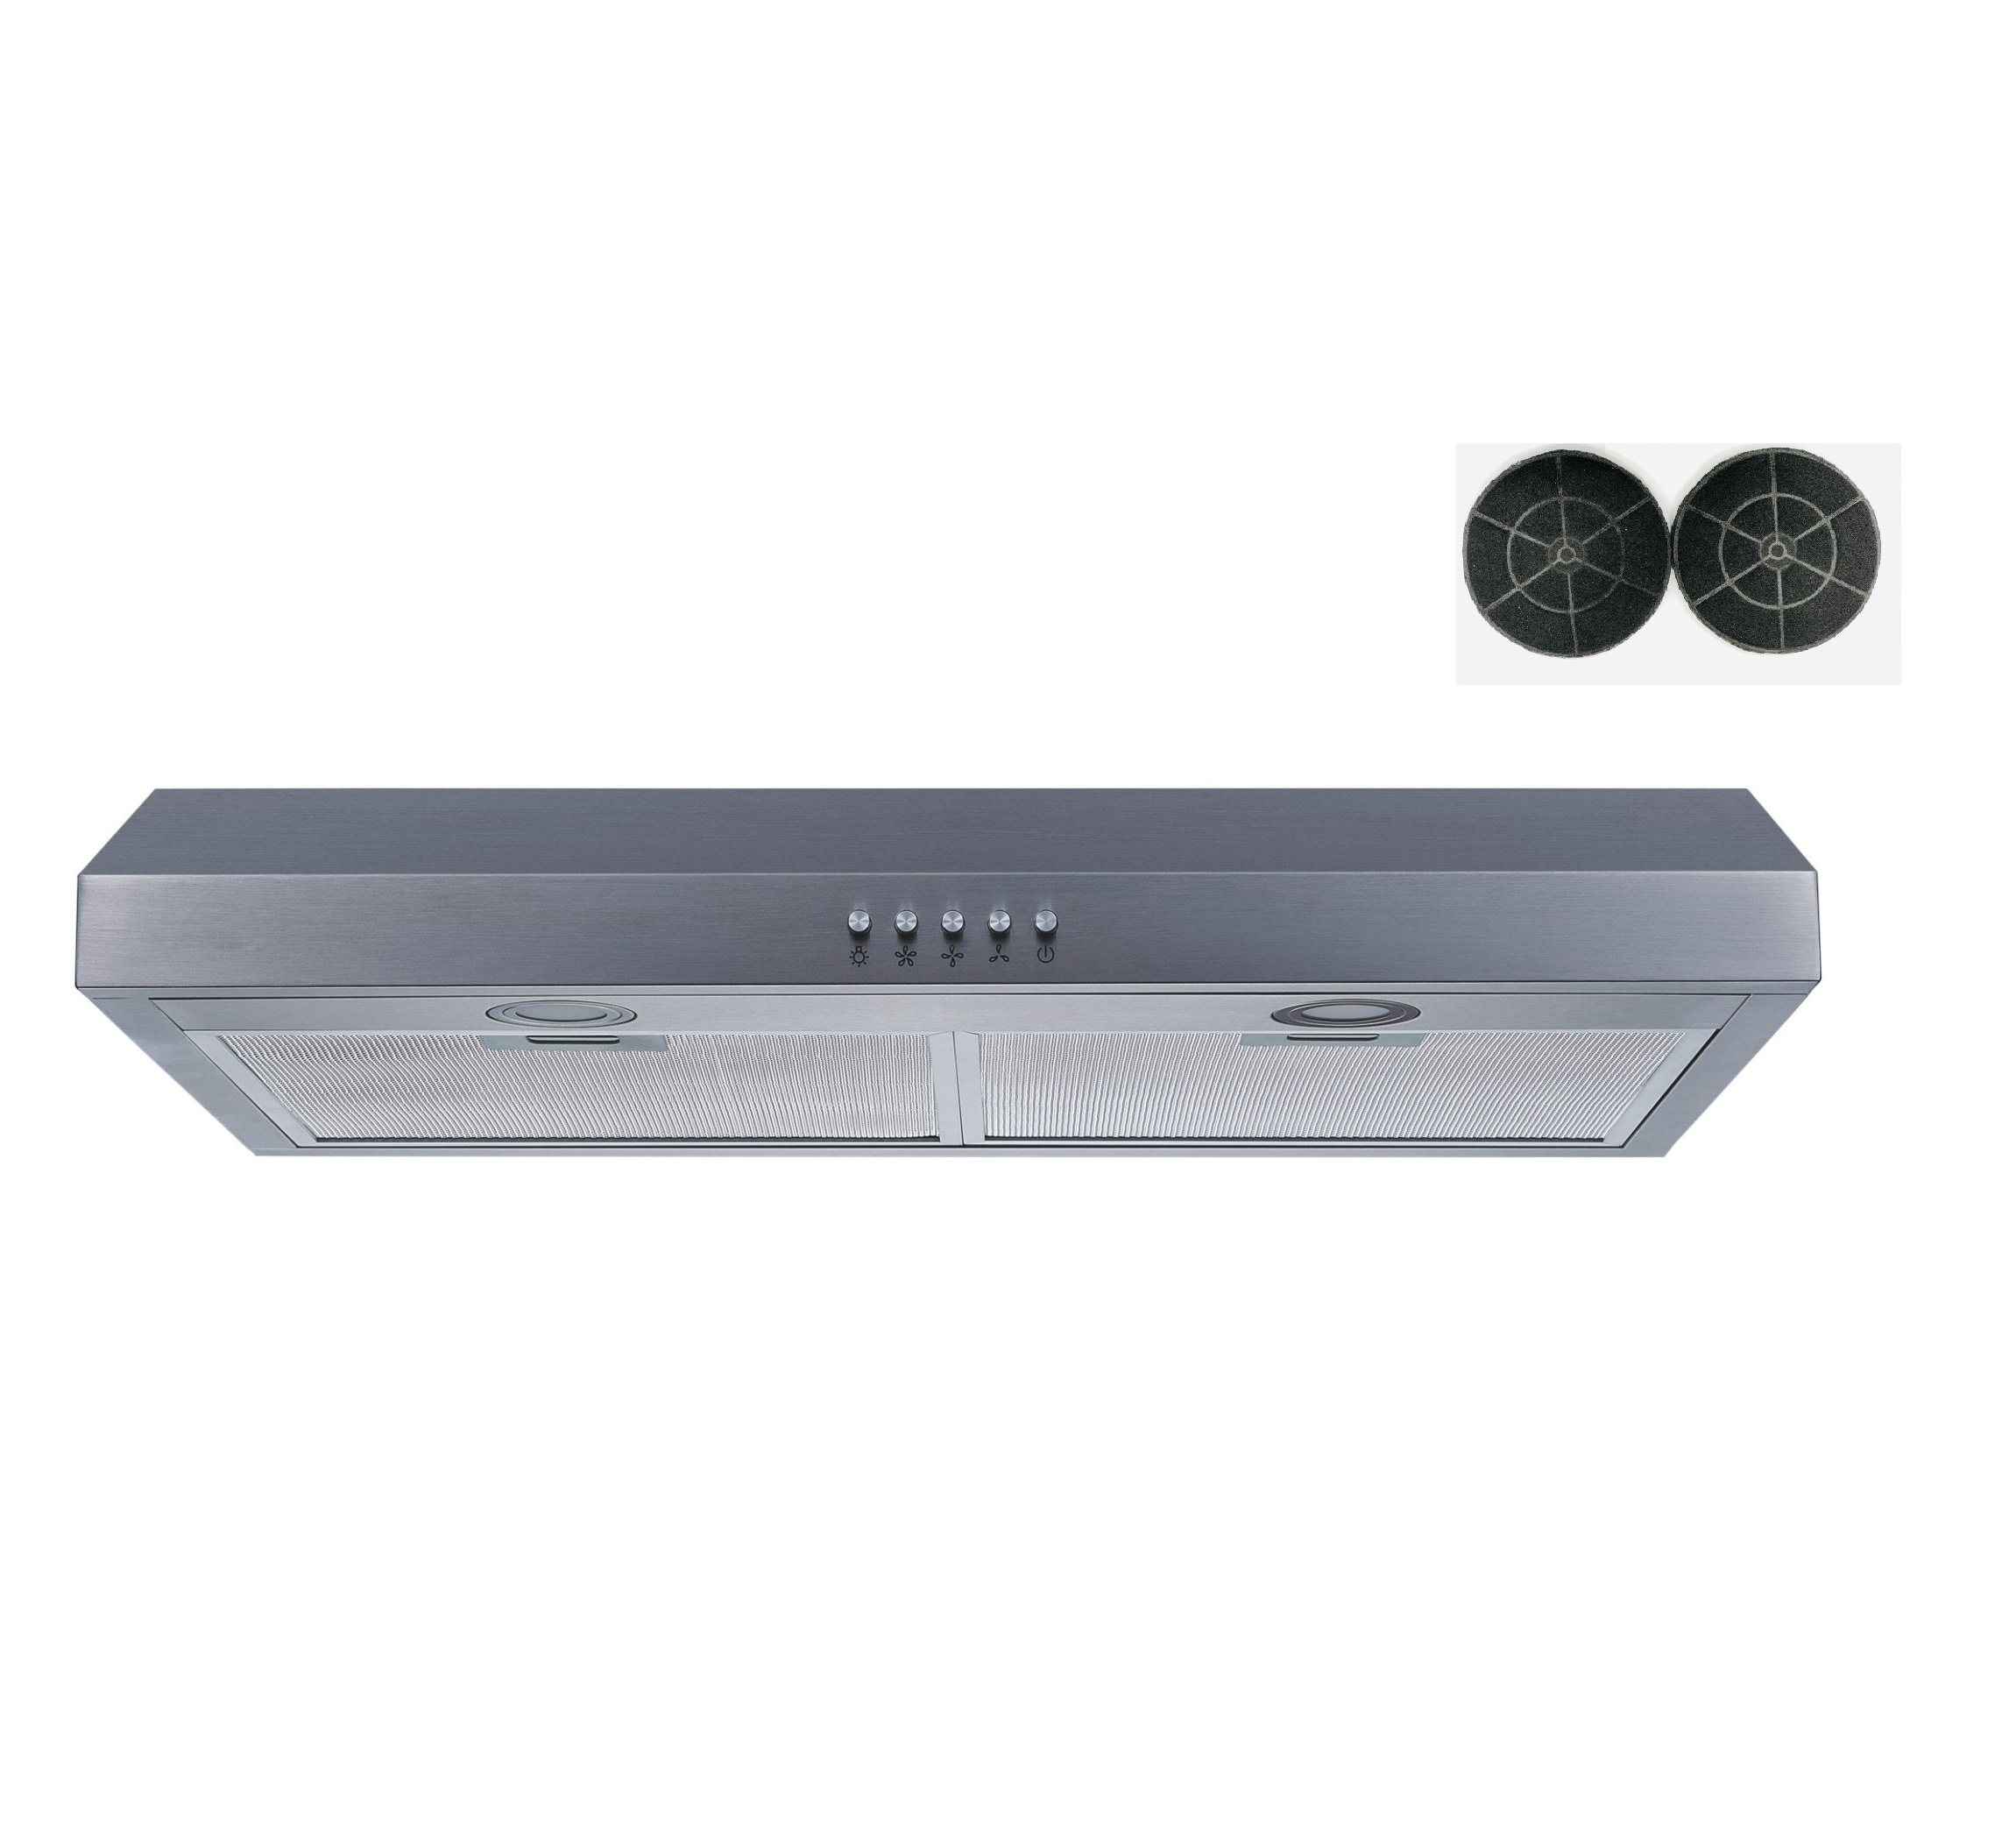 Winflo 30-in 301-CFM Convertible Stainless Steel Under Cabinet Range Hoods Undercabinet Mount with Charcoal Filter | LRU08C30C